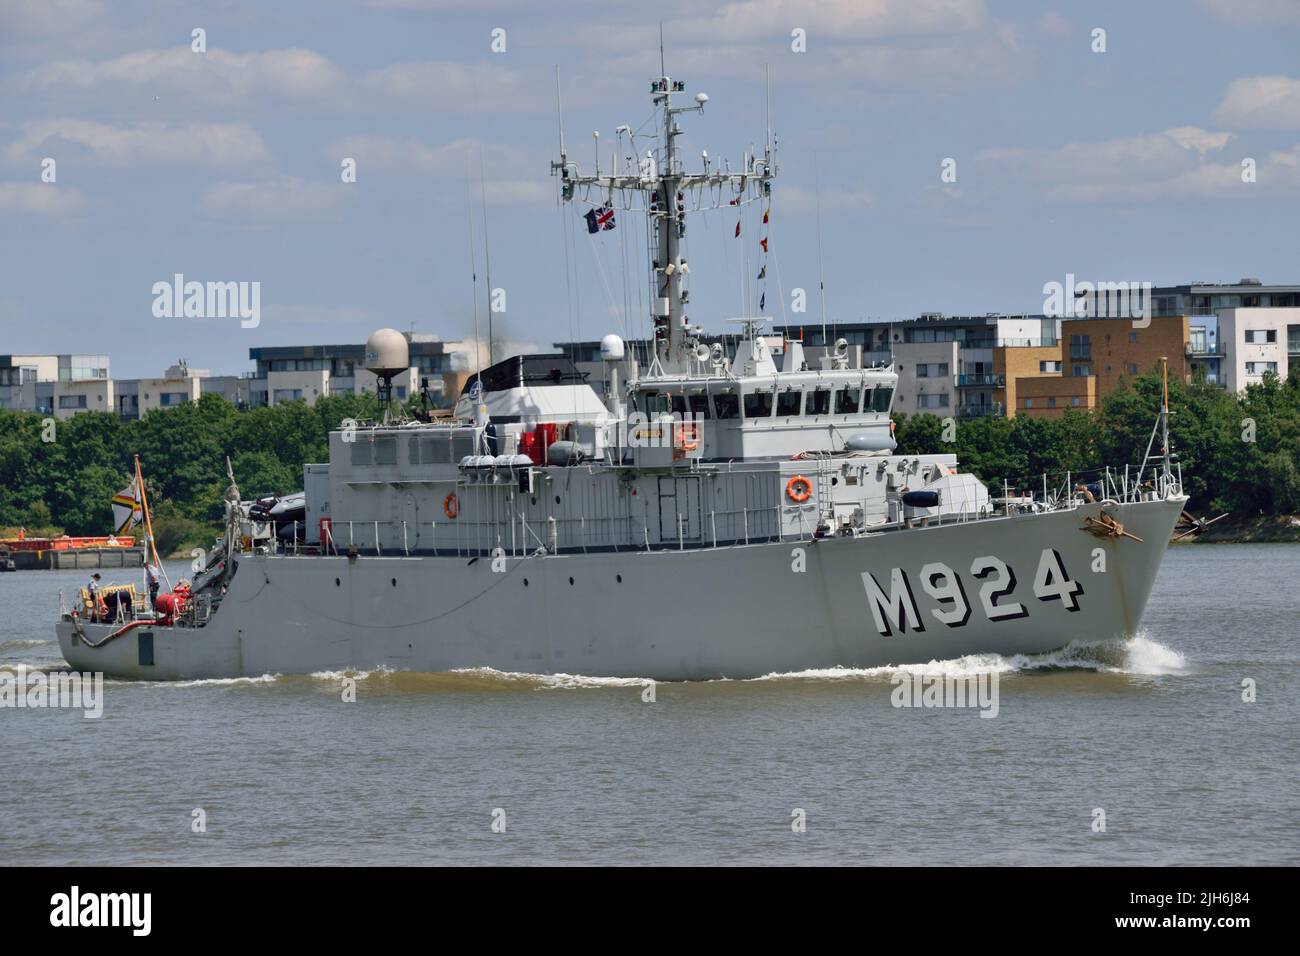 Belgian Navy minesweeper BNS Primula M924 arrives on the River Thames in London Stock Photo